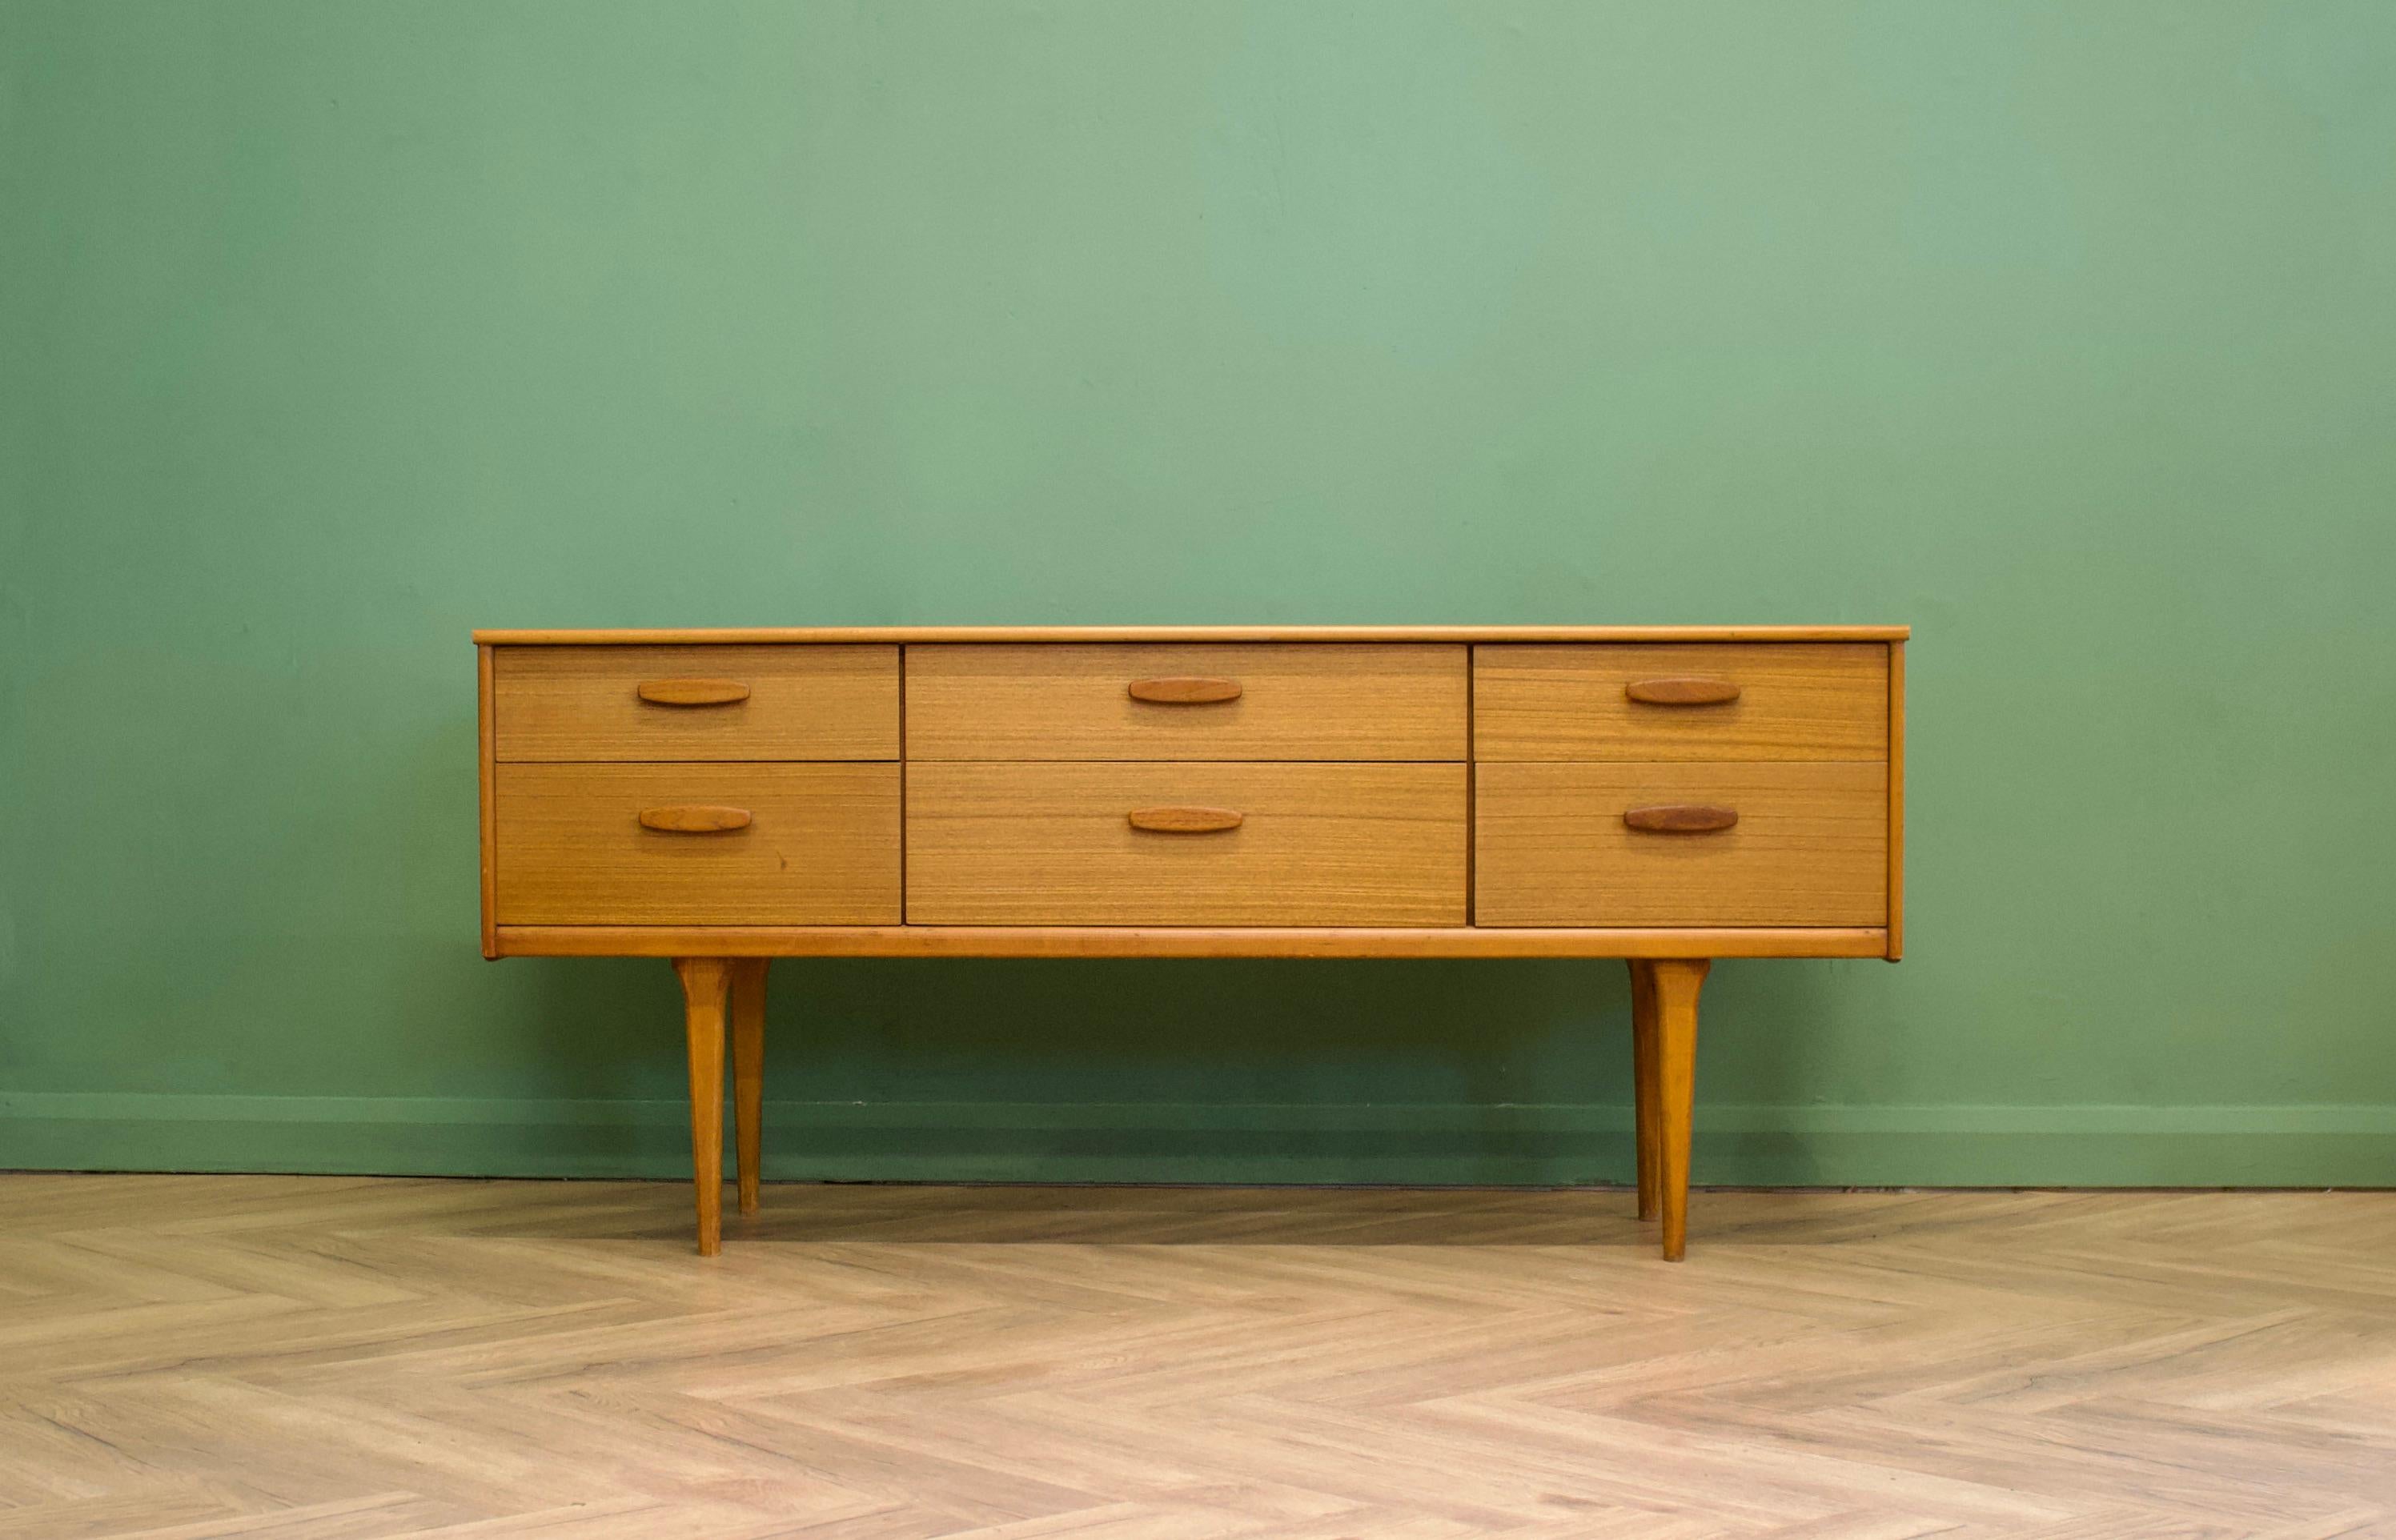 A teak long and low chest of drawers or compact sideboard from Austinsuite London- Circa 1960s

Designed by Frank Guille

It features six drawers

The piece stands on delicate tapered legs and each drawer has solid teak handles